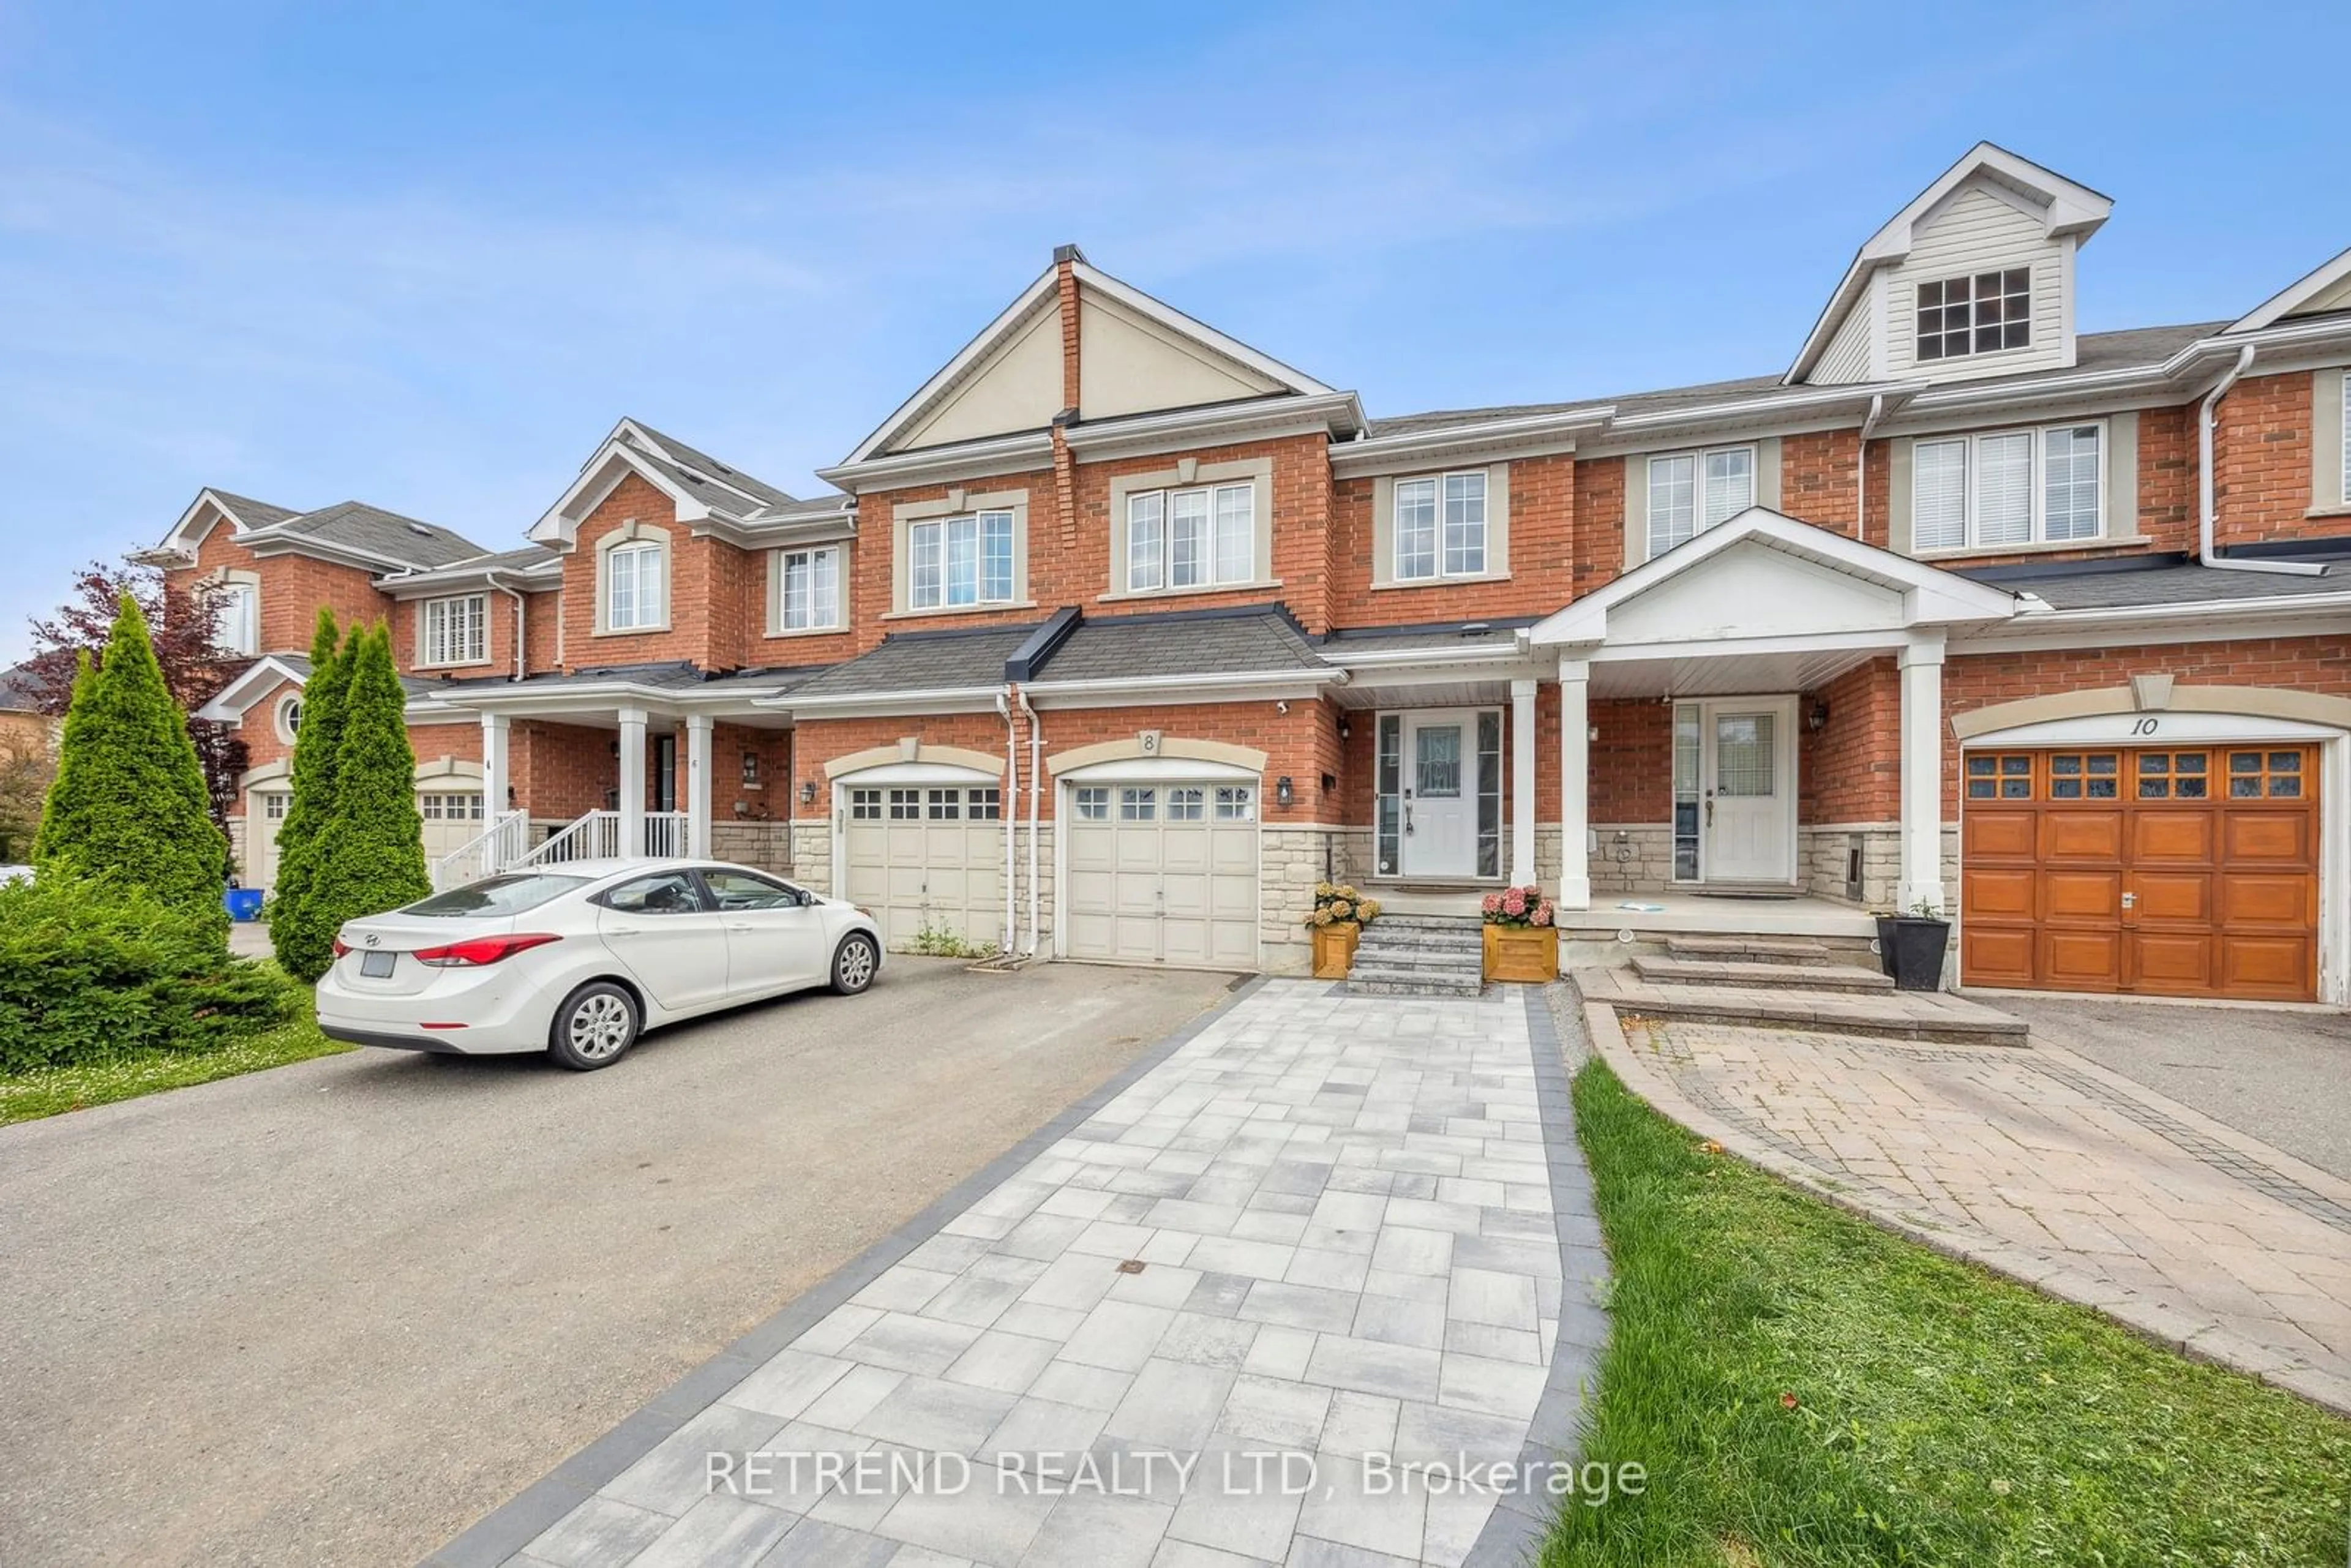 Home with brick exterior material for 8 Shanty St, Vaughan Ontario L6A 0T9